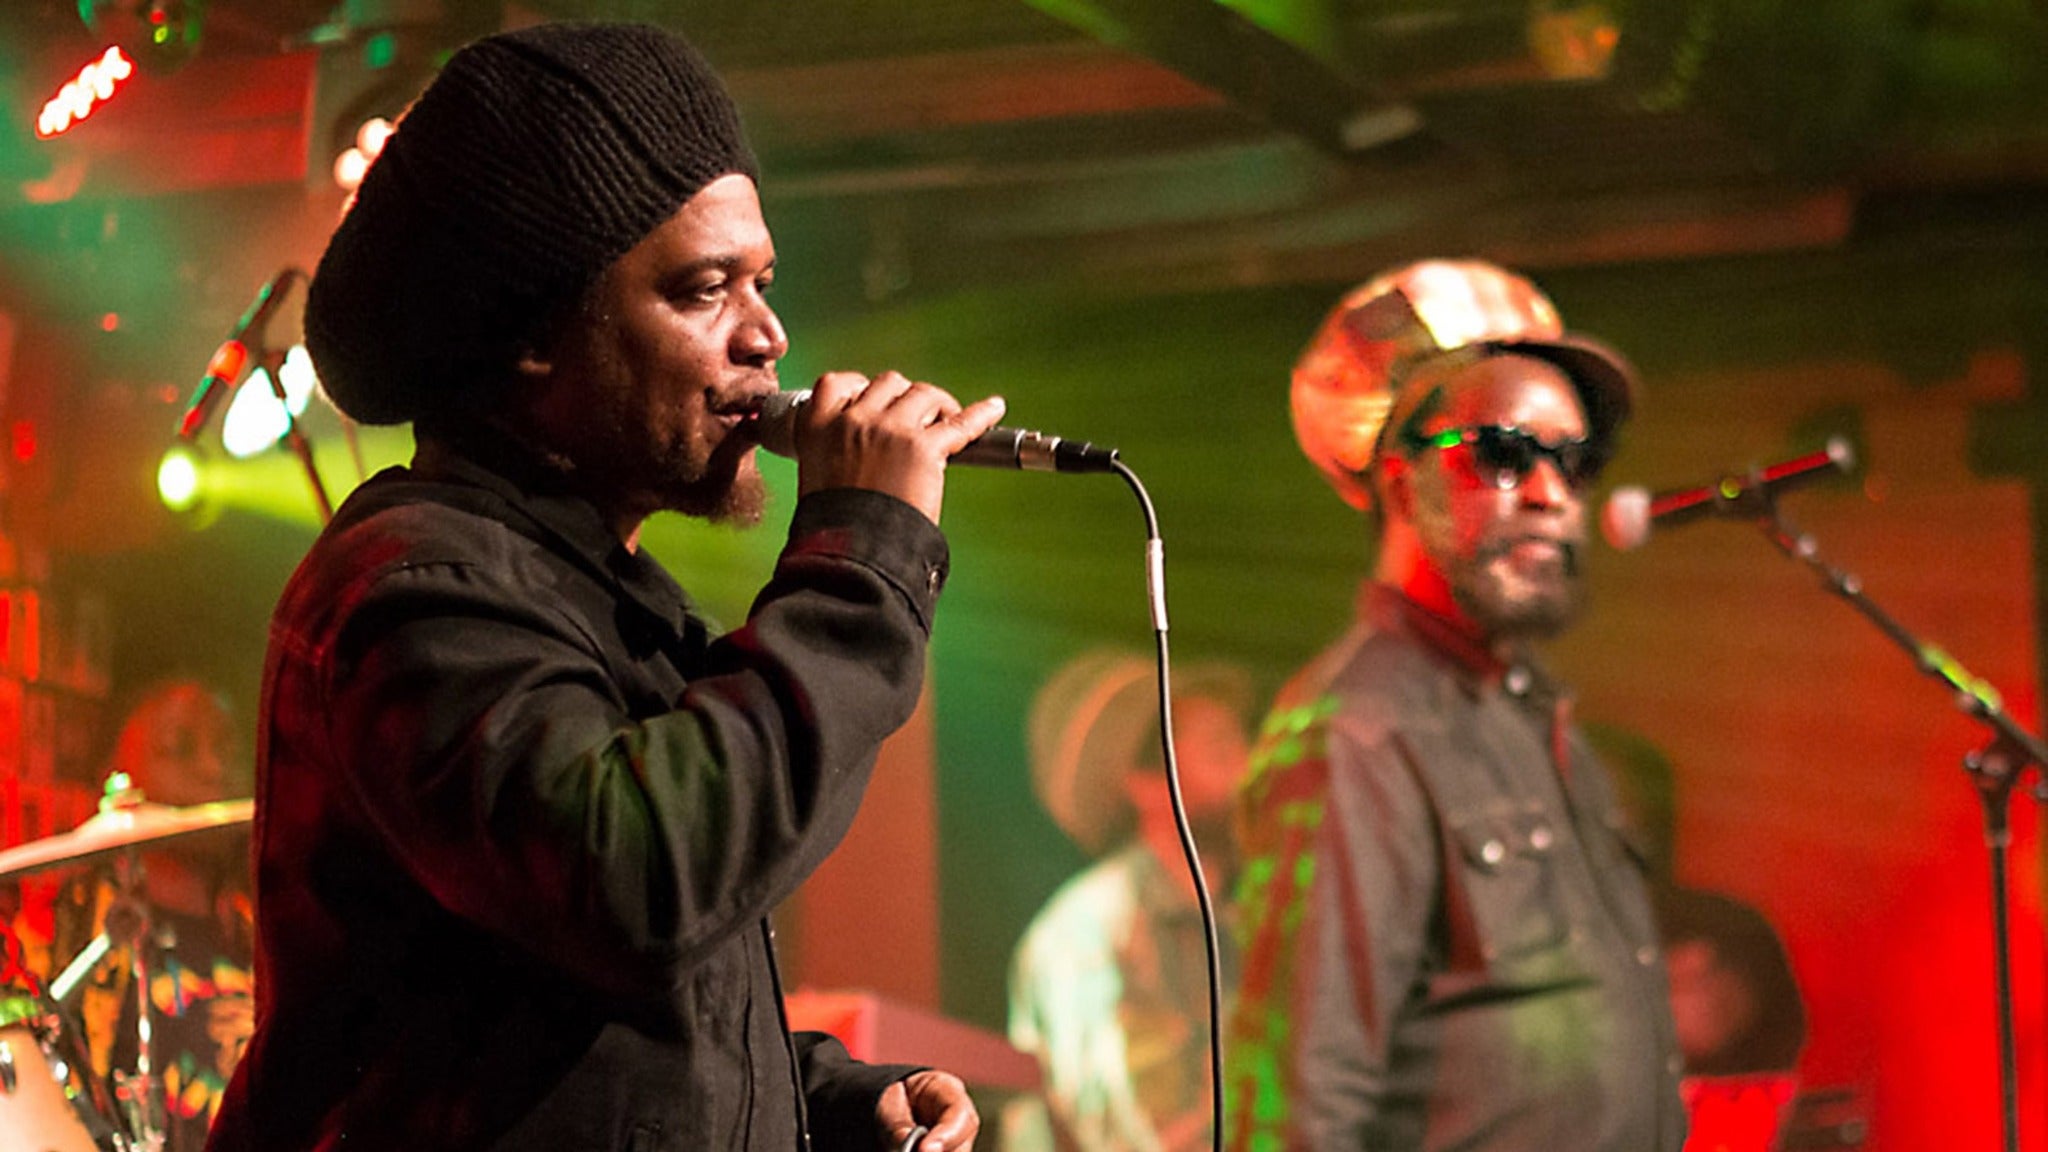 Black Uhuru Ft. Dylans Dharma with special guest Selasee & The Fafa Family